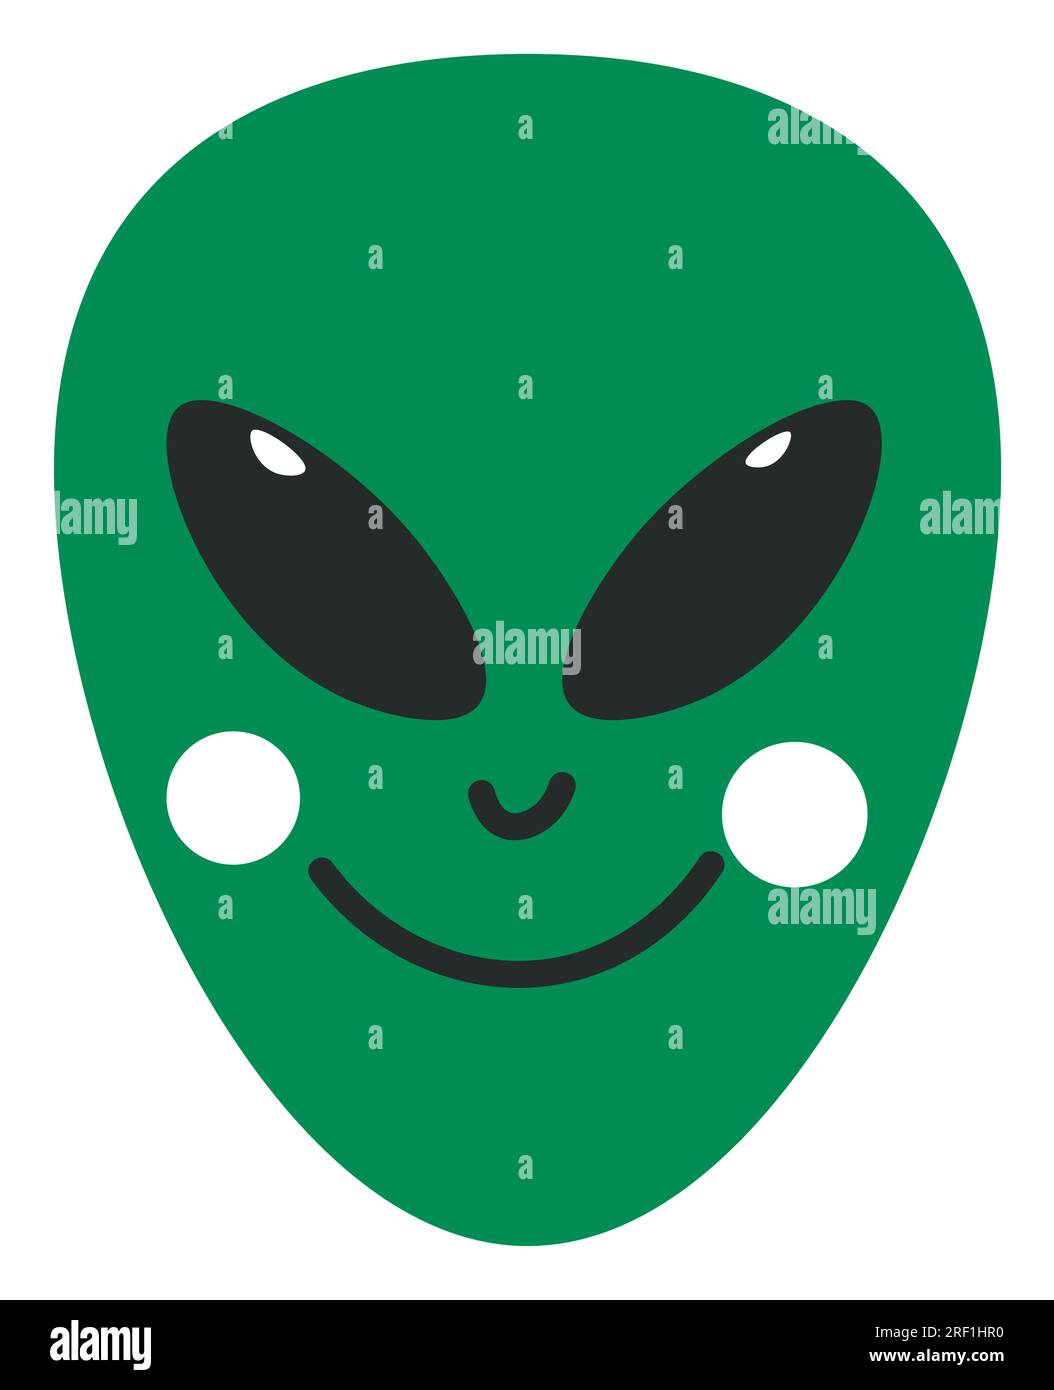 Alien character face, extraterrestial personage Stock Vector